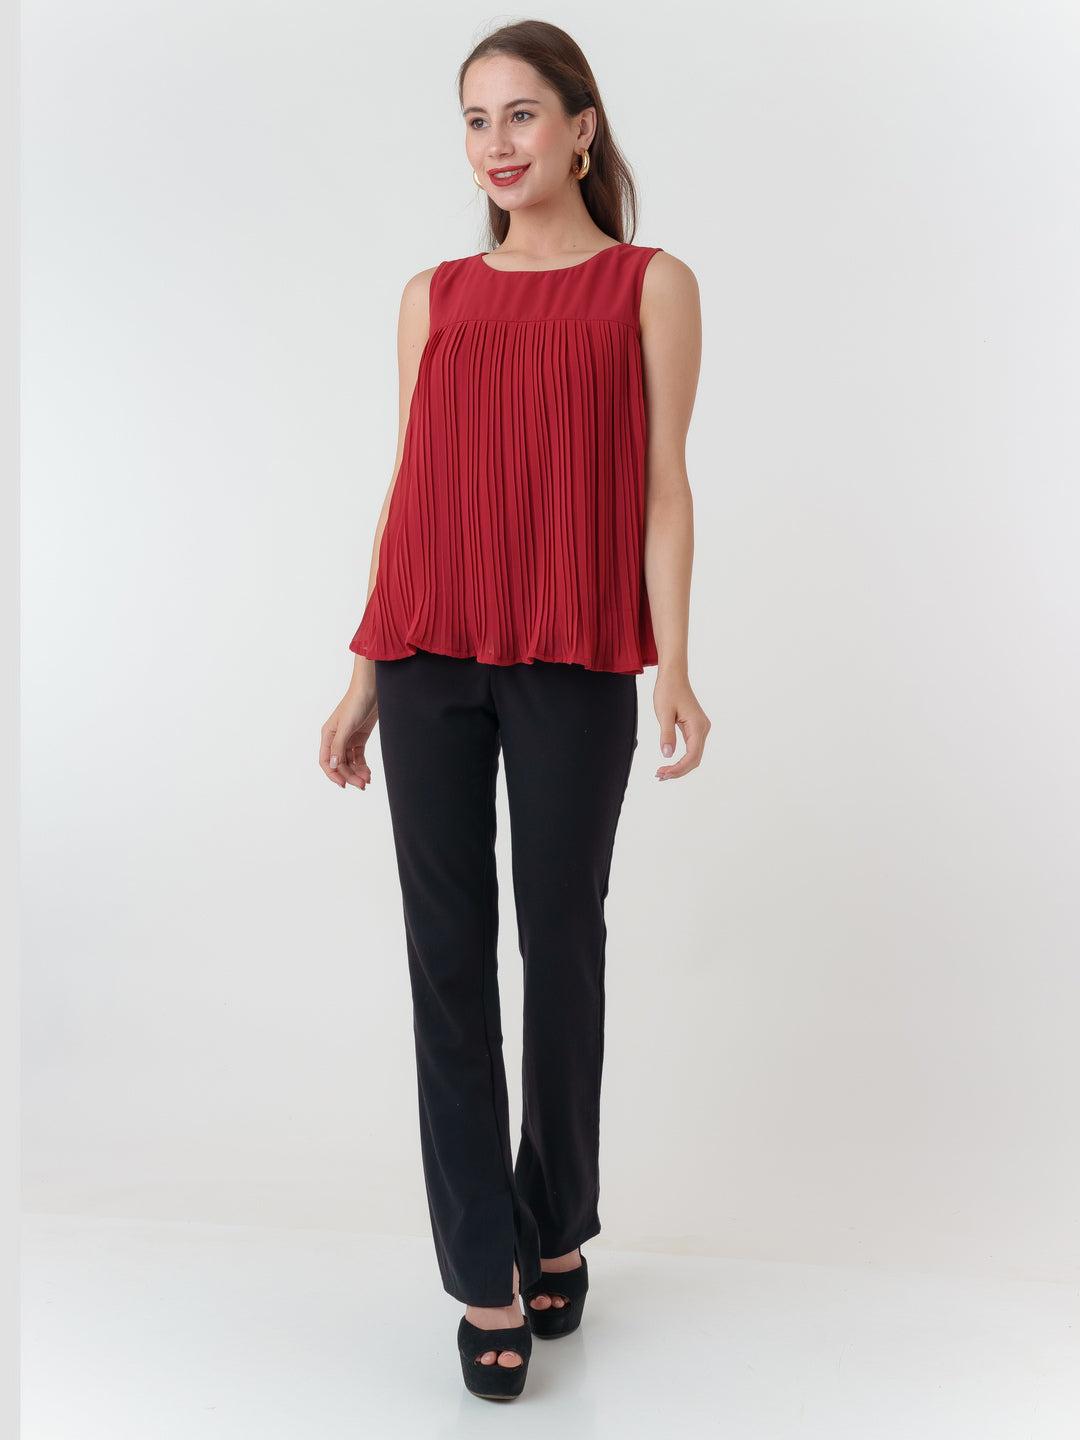 Red Solid Flared Top For Women By Zink London